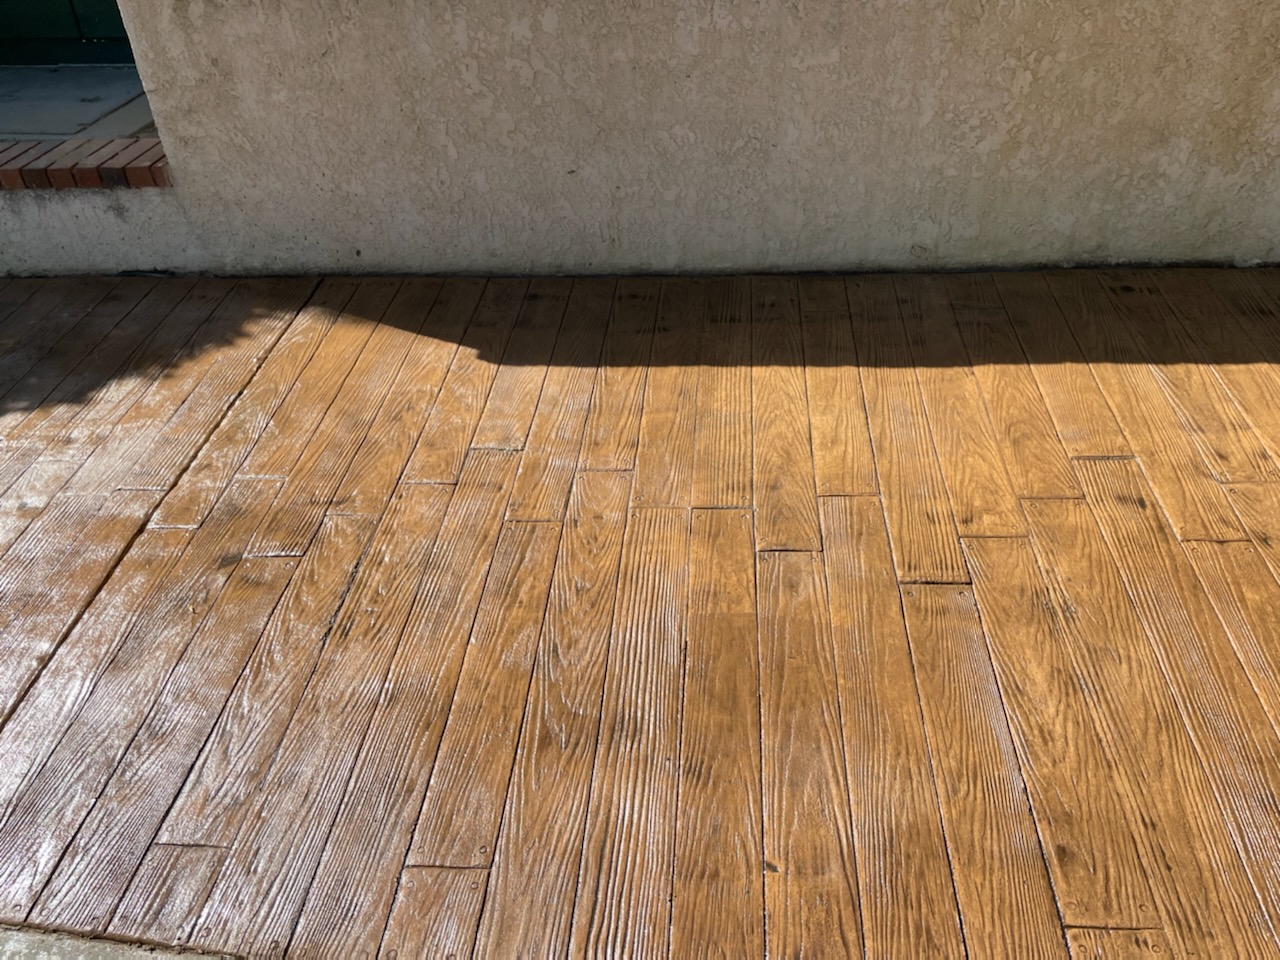 Close view of the wooden flooring